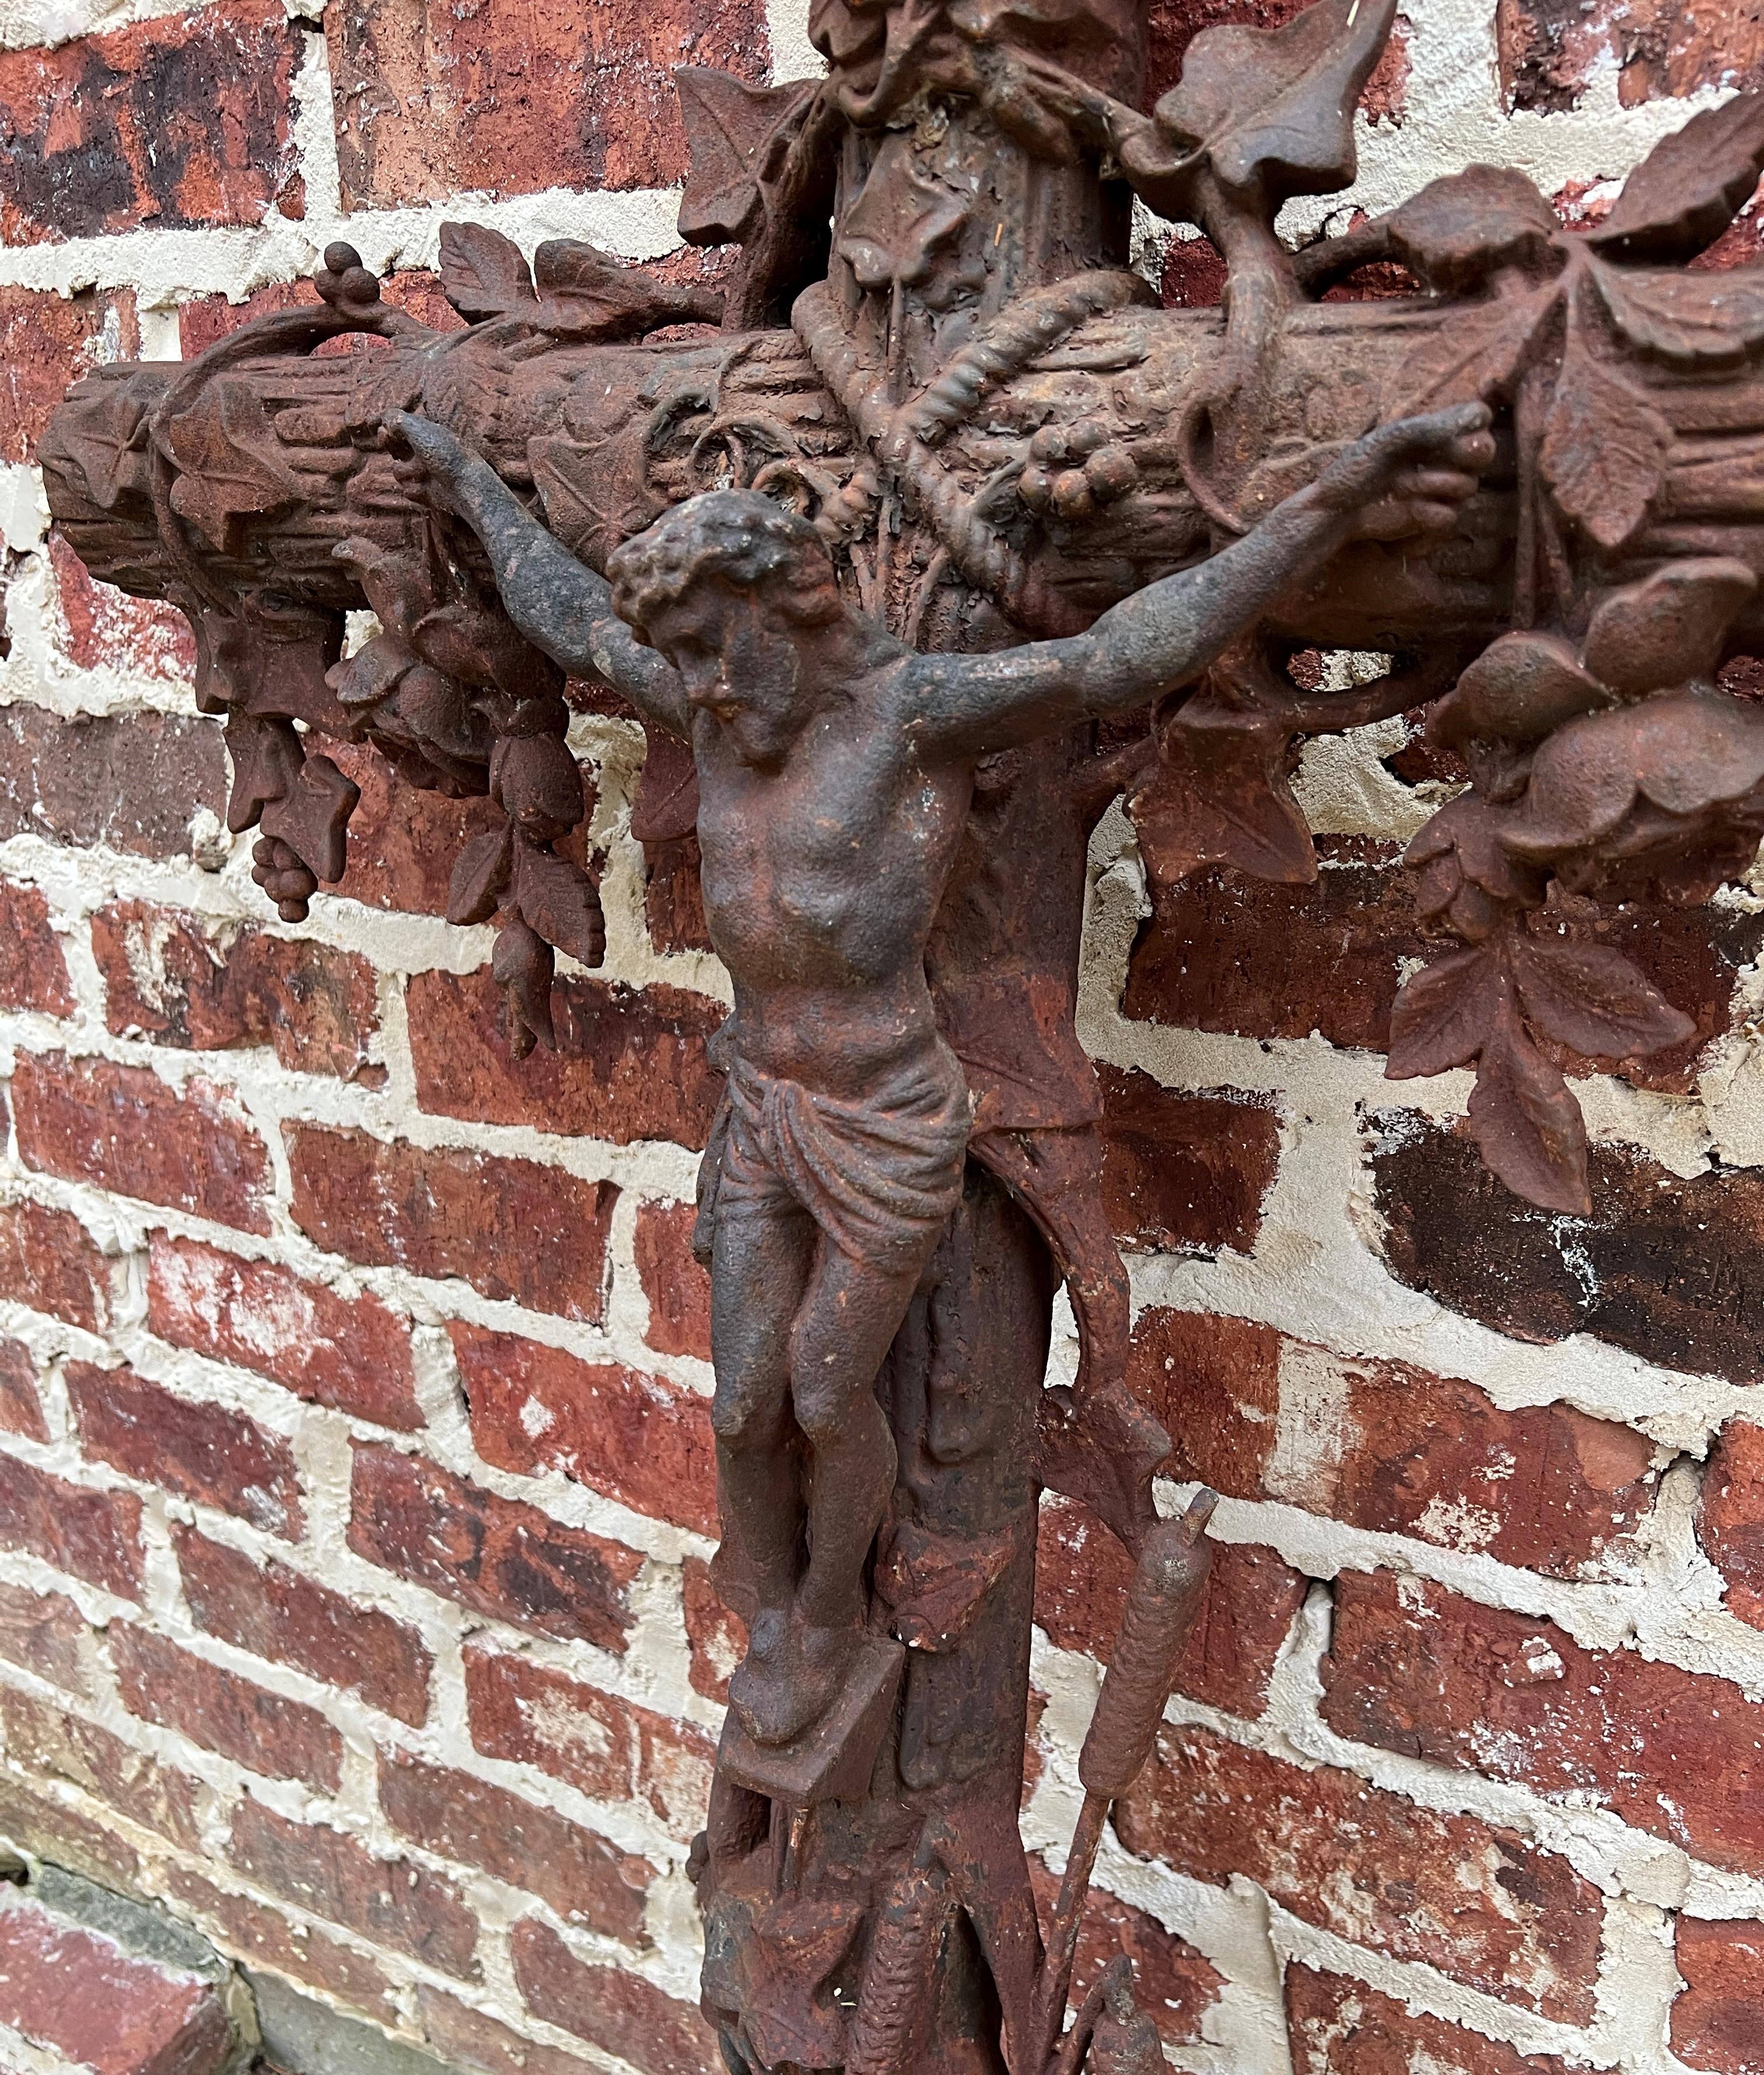 TALL Antique French cast iron cross crucifix~~chapel church garden architectural yard cemetery prayer room wall hanging~~c. 1890s

Fabulous details throughout~~original aged patina

 The perfect accent piece for any home or prayer room or as a